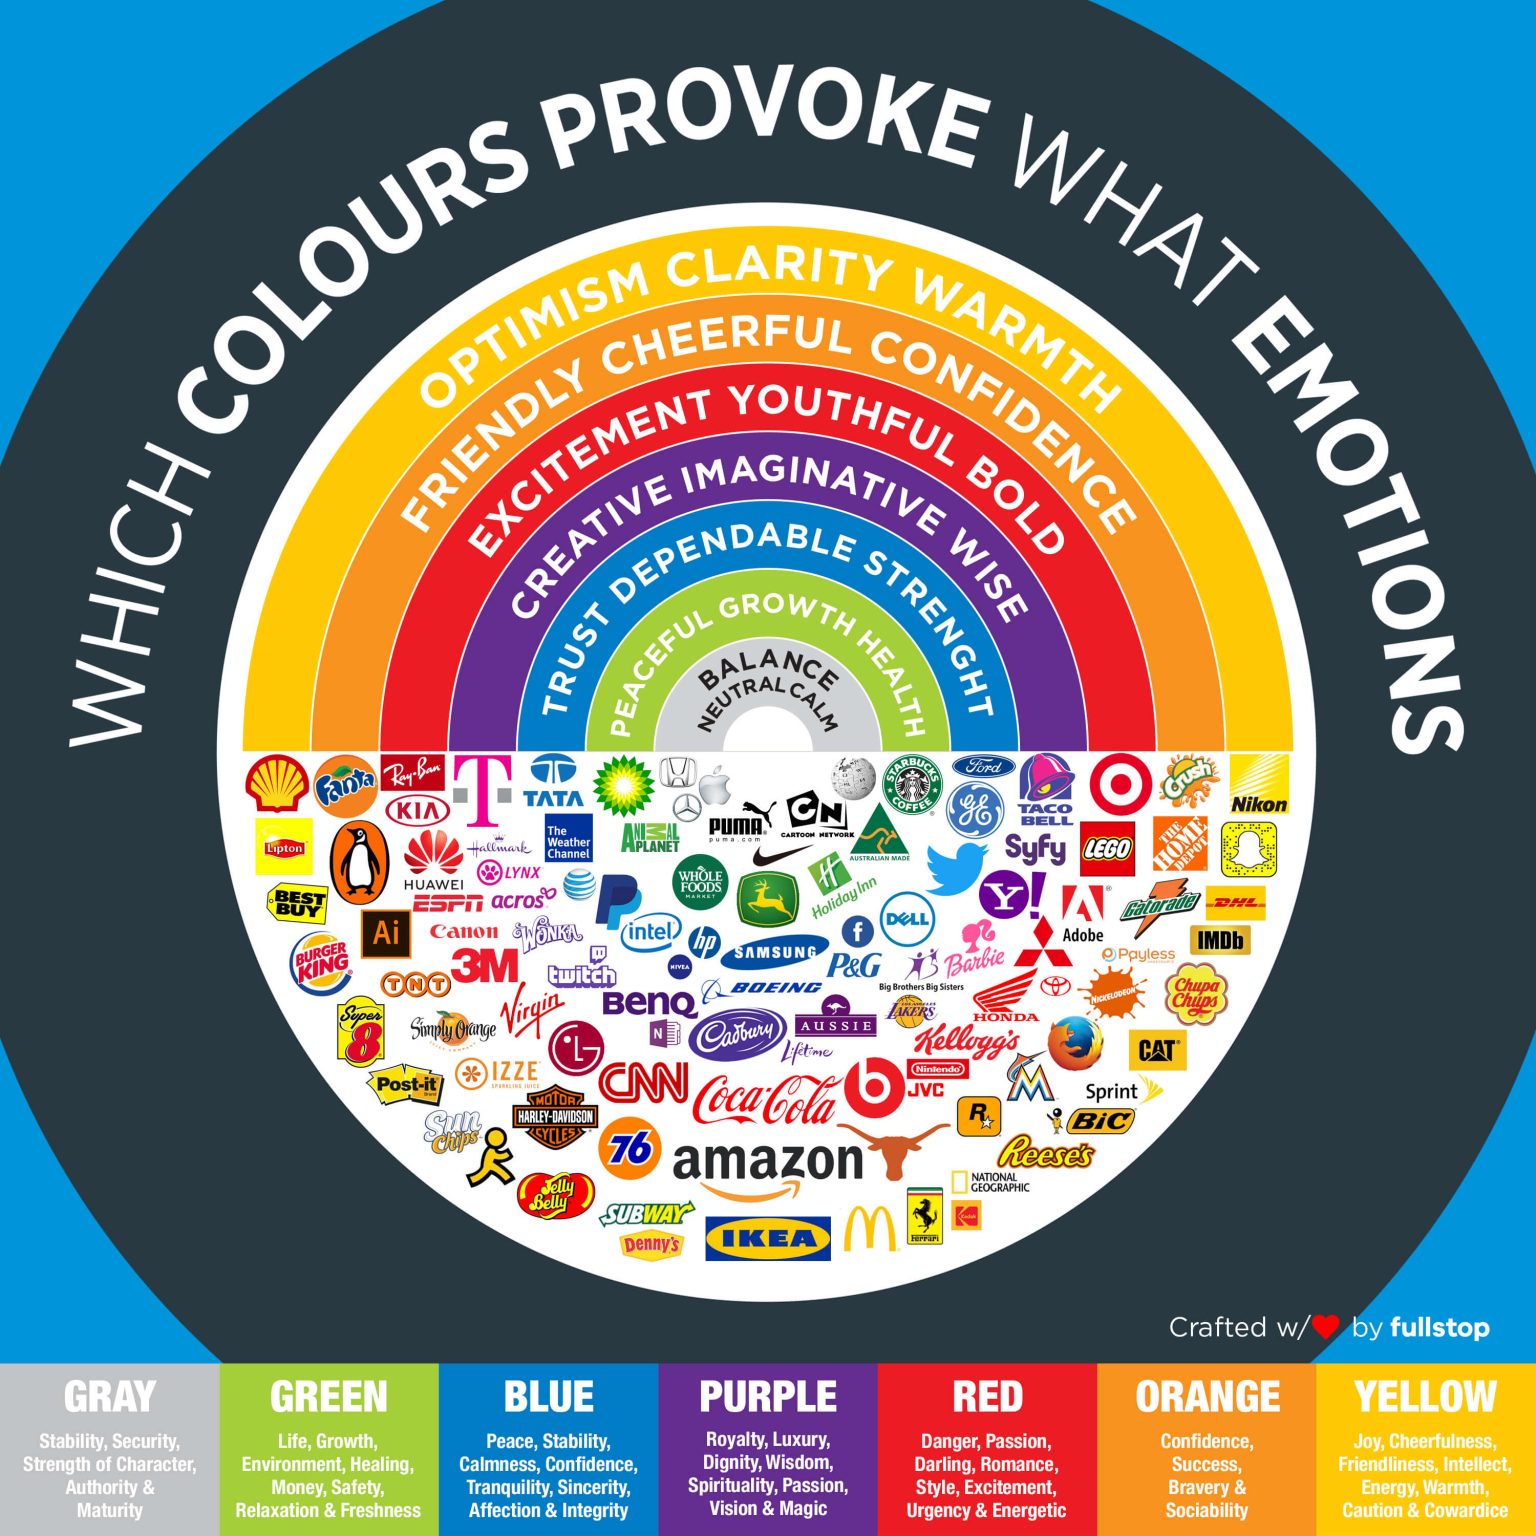 Unleashing the Power of 7: How Brand Colors Can Transform Your Business